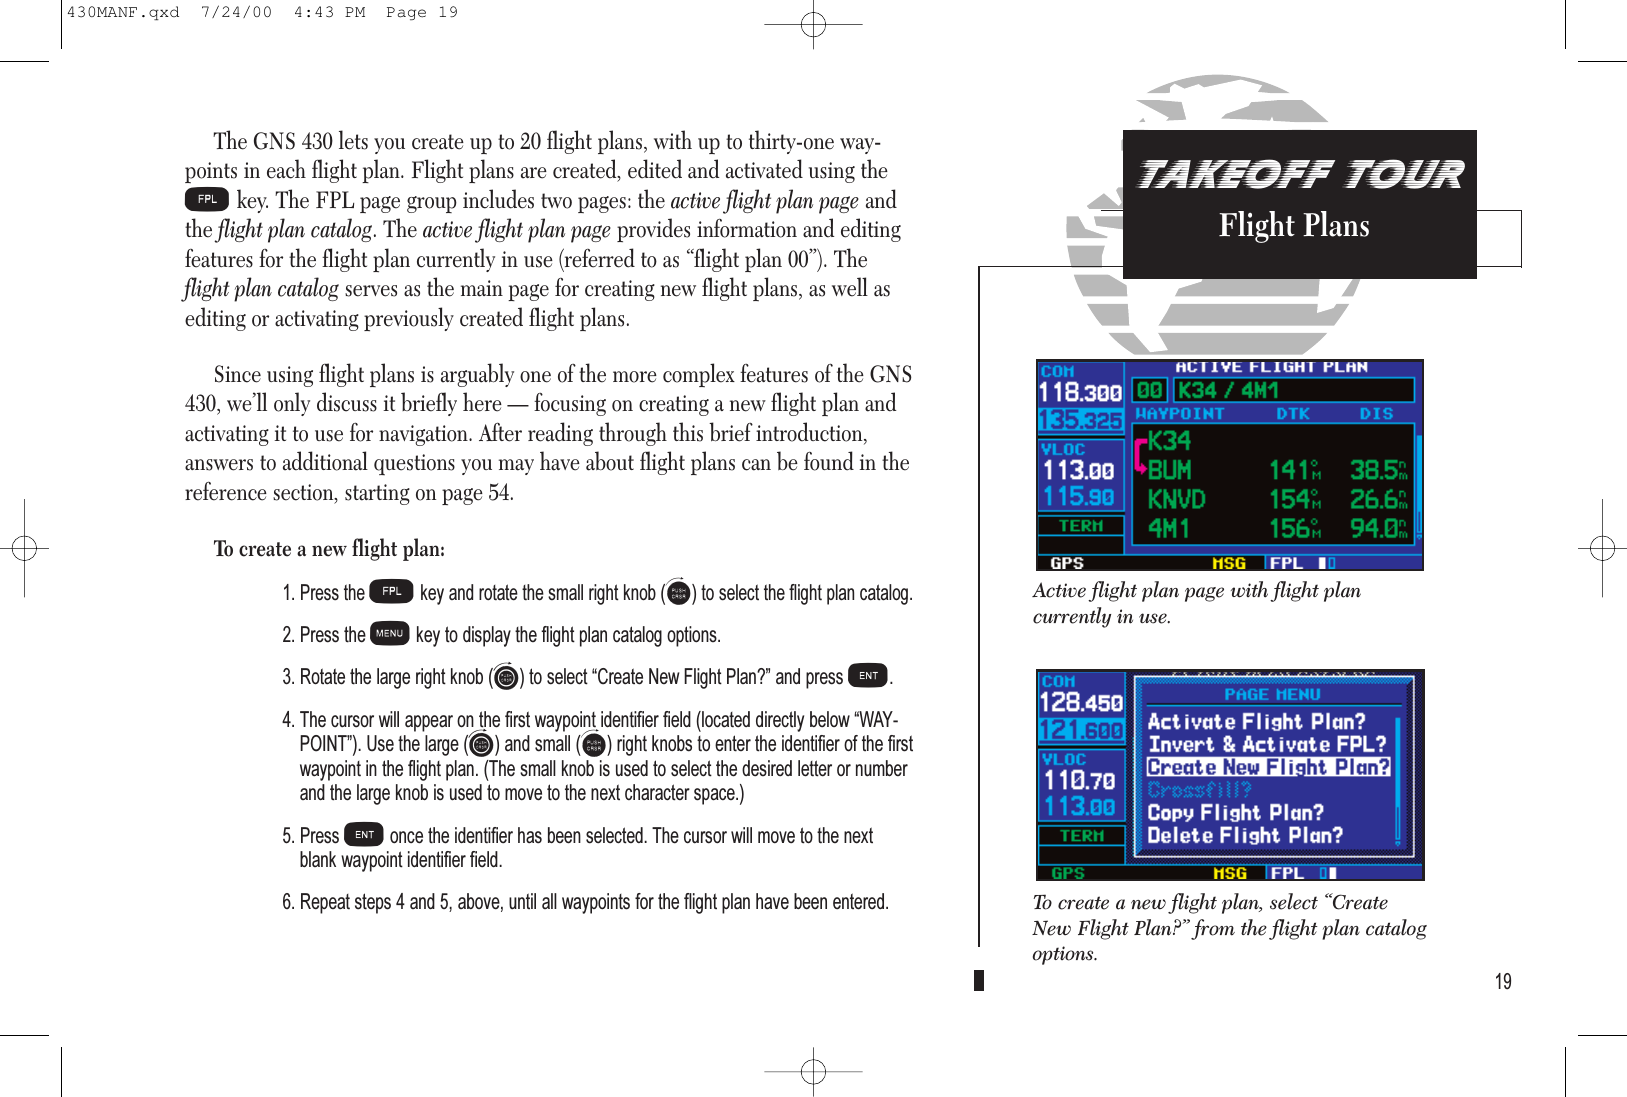 TAKEOFF TOURFlight PlansThe GNS 430 lets you create up to 20 flight plans, with up to thirty-one way-points in each flight plan. Flight plans are created, edited and activated using theFkey. The FPL page group includes two pages: the active flight plan page andthe flight plan catalog. The active flight plan page provides information and editingfeatures for the flight plan currently in use (referred to as “flight plan 00”). Theflight plan catalog serves as the main page for creating new flight plans, as well asediting or activating previously created flight plans.Since using flight plans is arguably one of the more complex features of the GNS430, we’ll only discuss it briefly here — focusing on creating a new flight plan andactivating it to use for navigation. After reading through this brief introduction,answers to additional questions you may have about flight plans can be found in thereference section, starting on page 54.To create a new flight plan:1. Press theFkey and rotate the small right knob(a) to select the flight plan catalog.2. Press the mkey to display the flight plan catalog options.3. Rotate the large right knob (d) to select Create New Flight Plan? and press E.4. The cursor will appear on the first waypoint identifier field (located directly below WAY-POINT). Use the large (d) and small (a) right knobs to enter the identifier of the firstwaypoint in the flight plan. (The small knob is used to select the desired letter or numberand the large knob is used to move to the next character space.) 5. Press Eonce the identifier has been selected. The cursor will move to the nextblank waypoint identifier field.6. Repeat steps 4 and 5, above, until all waypoints for the flight plan have been entered.19Active flight plan page with flight plan currently in use.To create a new flight plan, select “CreateNew Flight Plan?” from the flight plan catalogoptions.430MANF.qxd  7/24/00  4:43 PM  Page 19